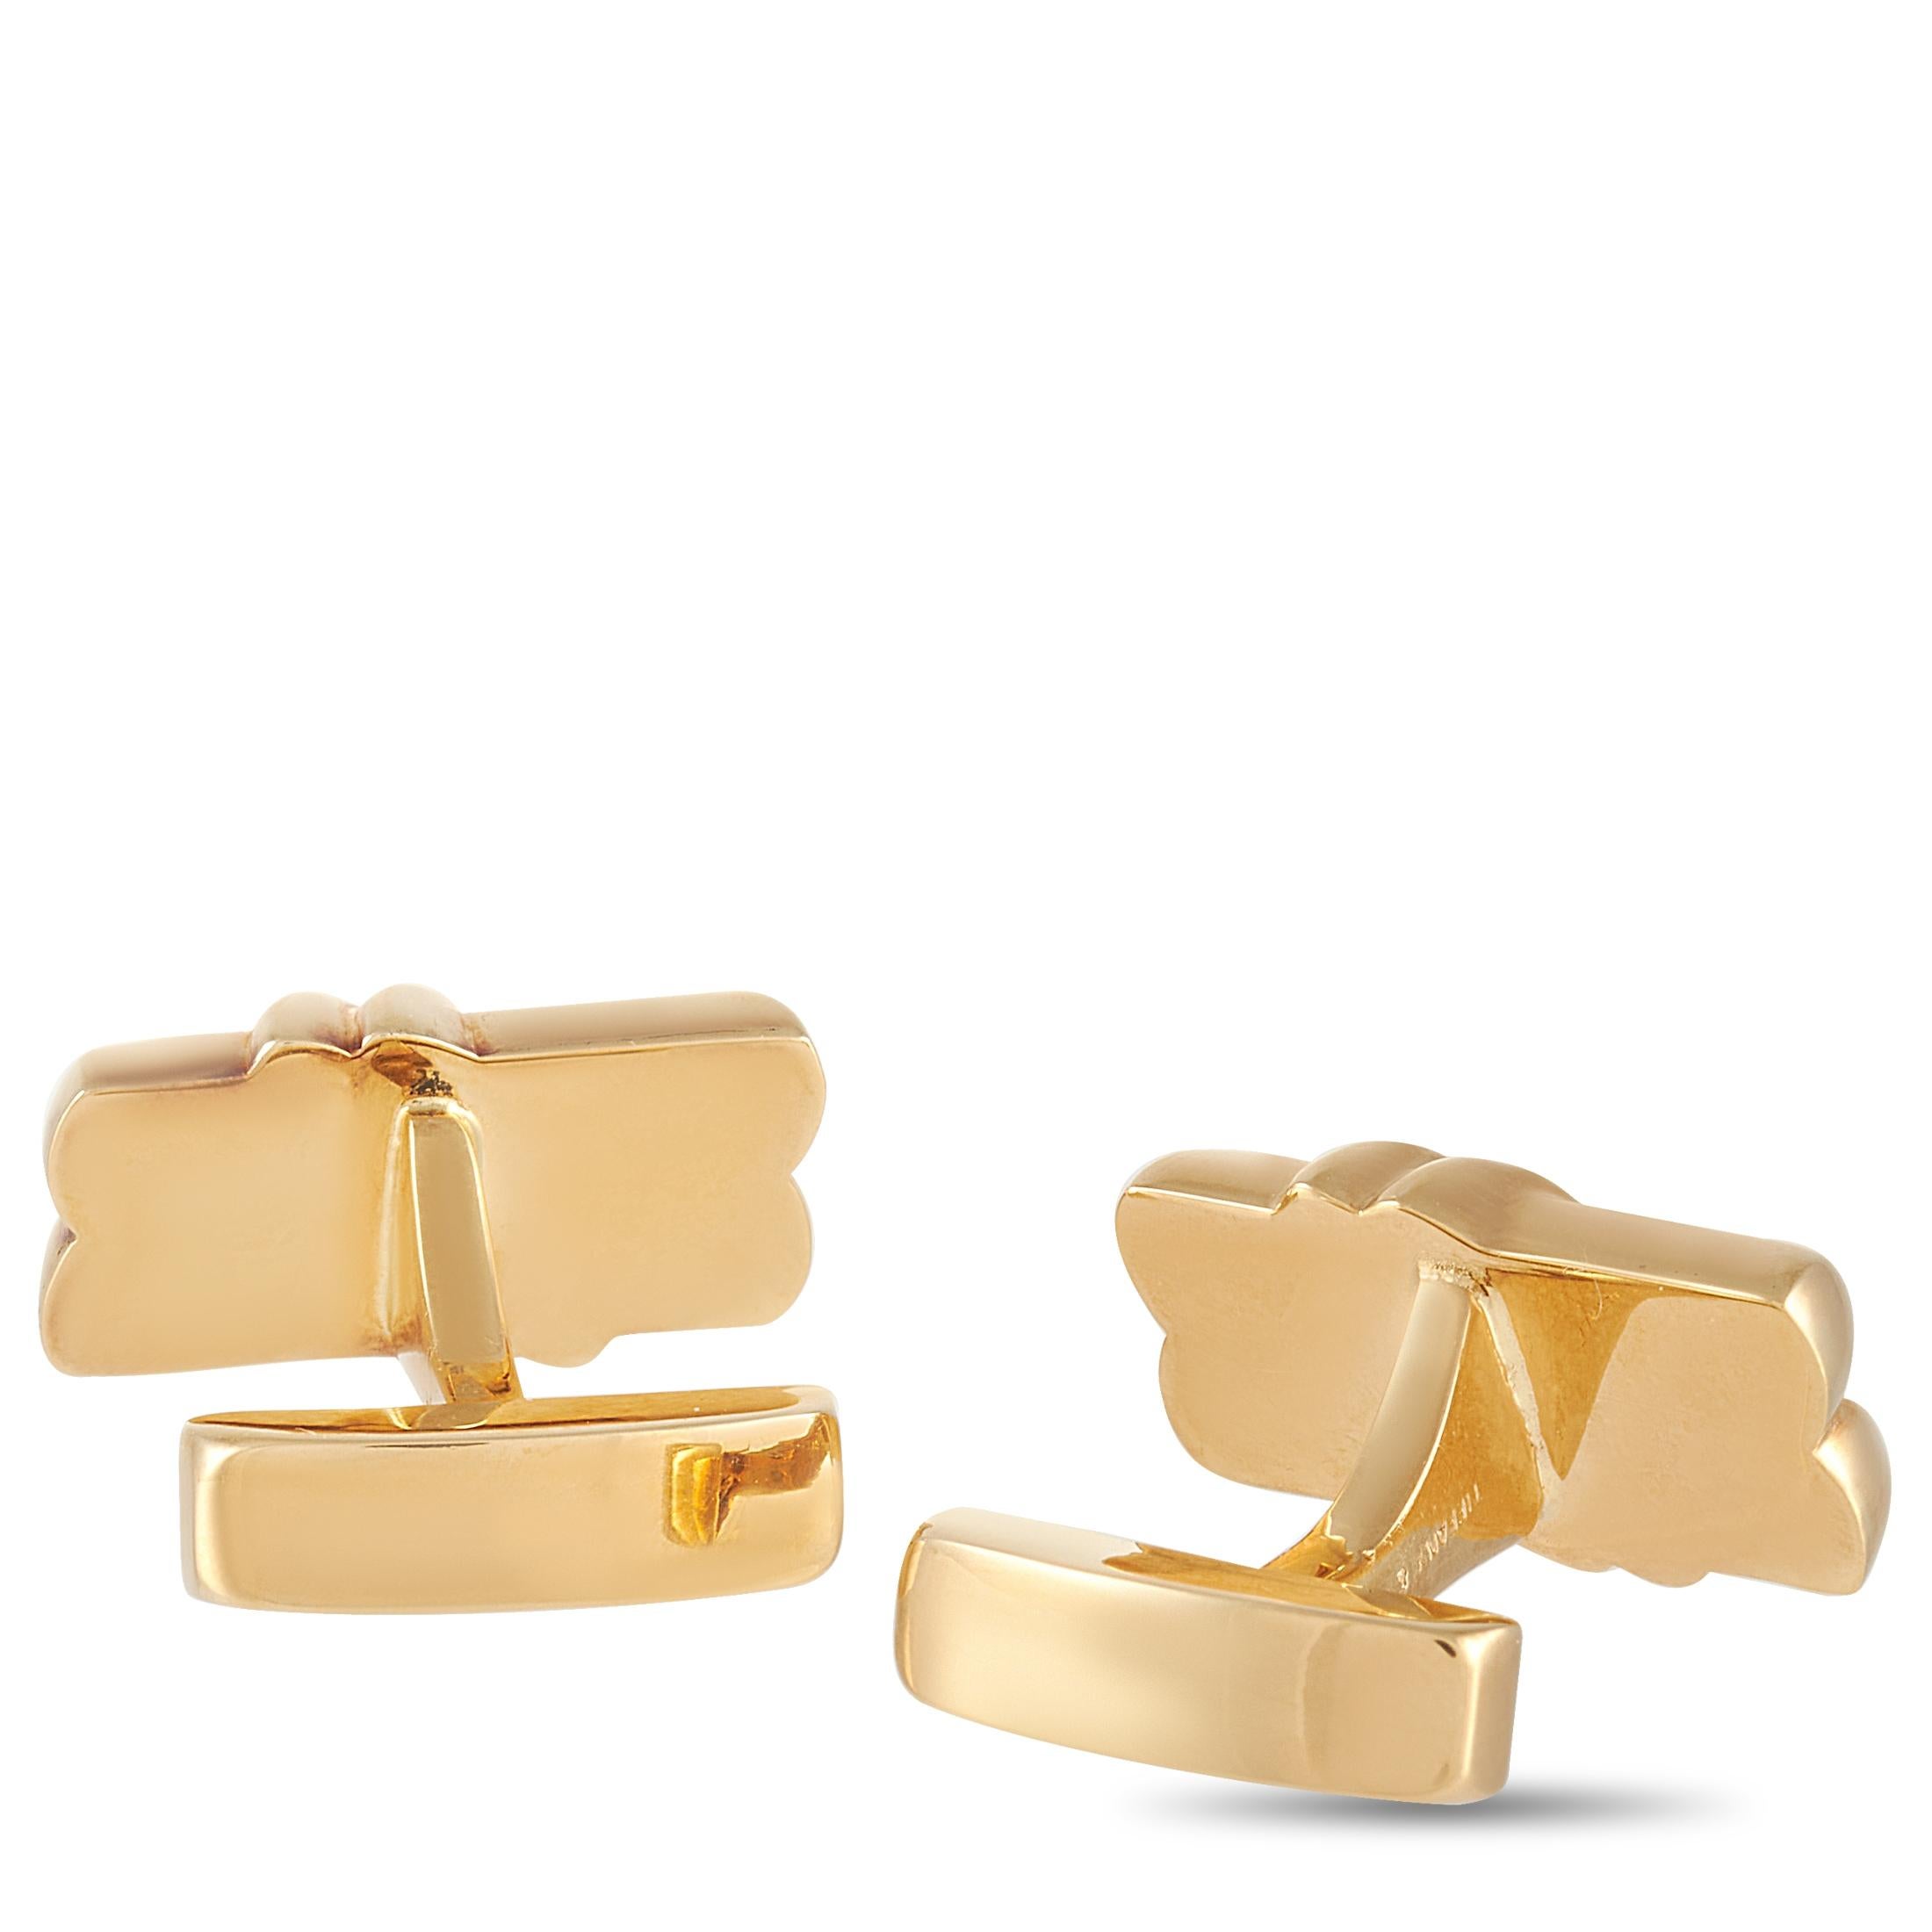 These Classy Tiffany & Co. 18K Yellow Gold Cufflinks are the perfect finishing touch. The cufflinks are made with 18K Yellow Gold forming two bars. The cufflinks measure 0.5 inches in length and 0.75 inches in width with a total weight of 17.6